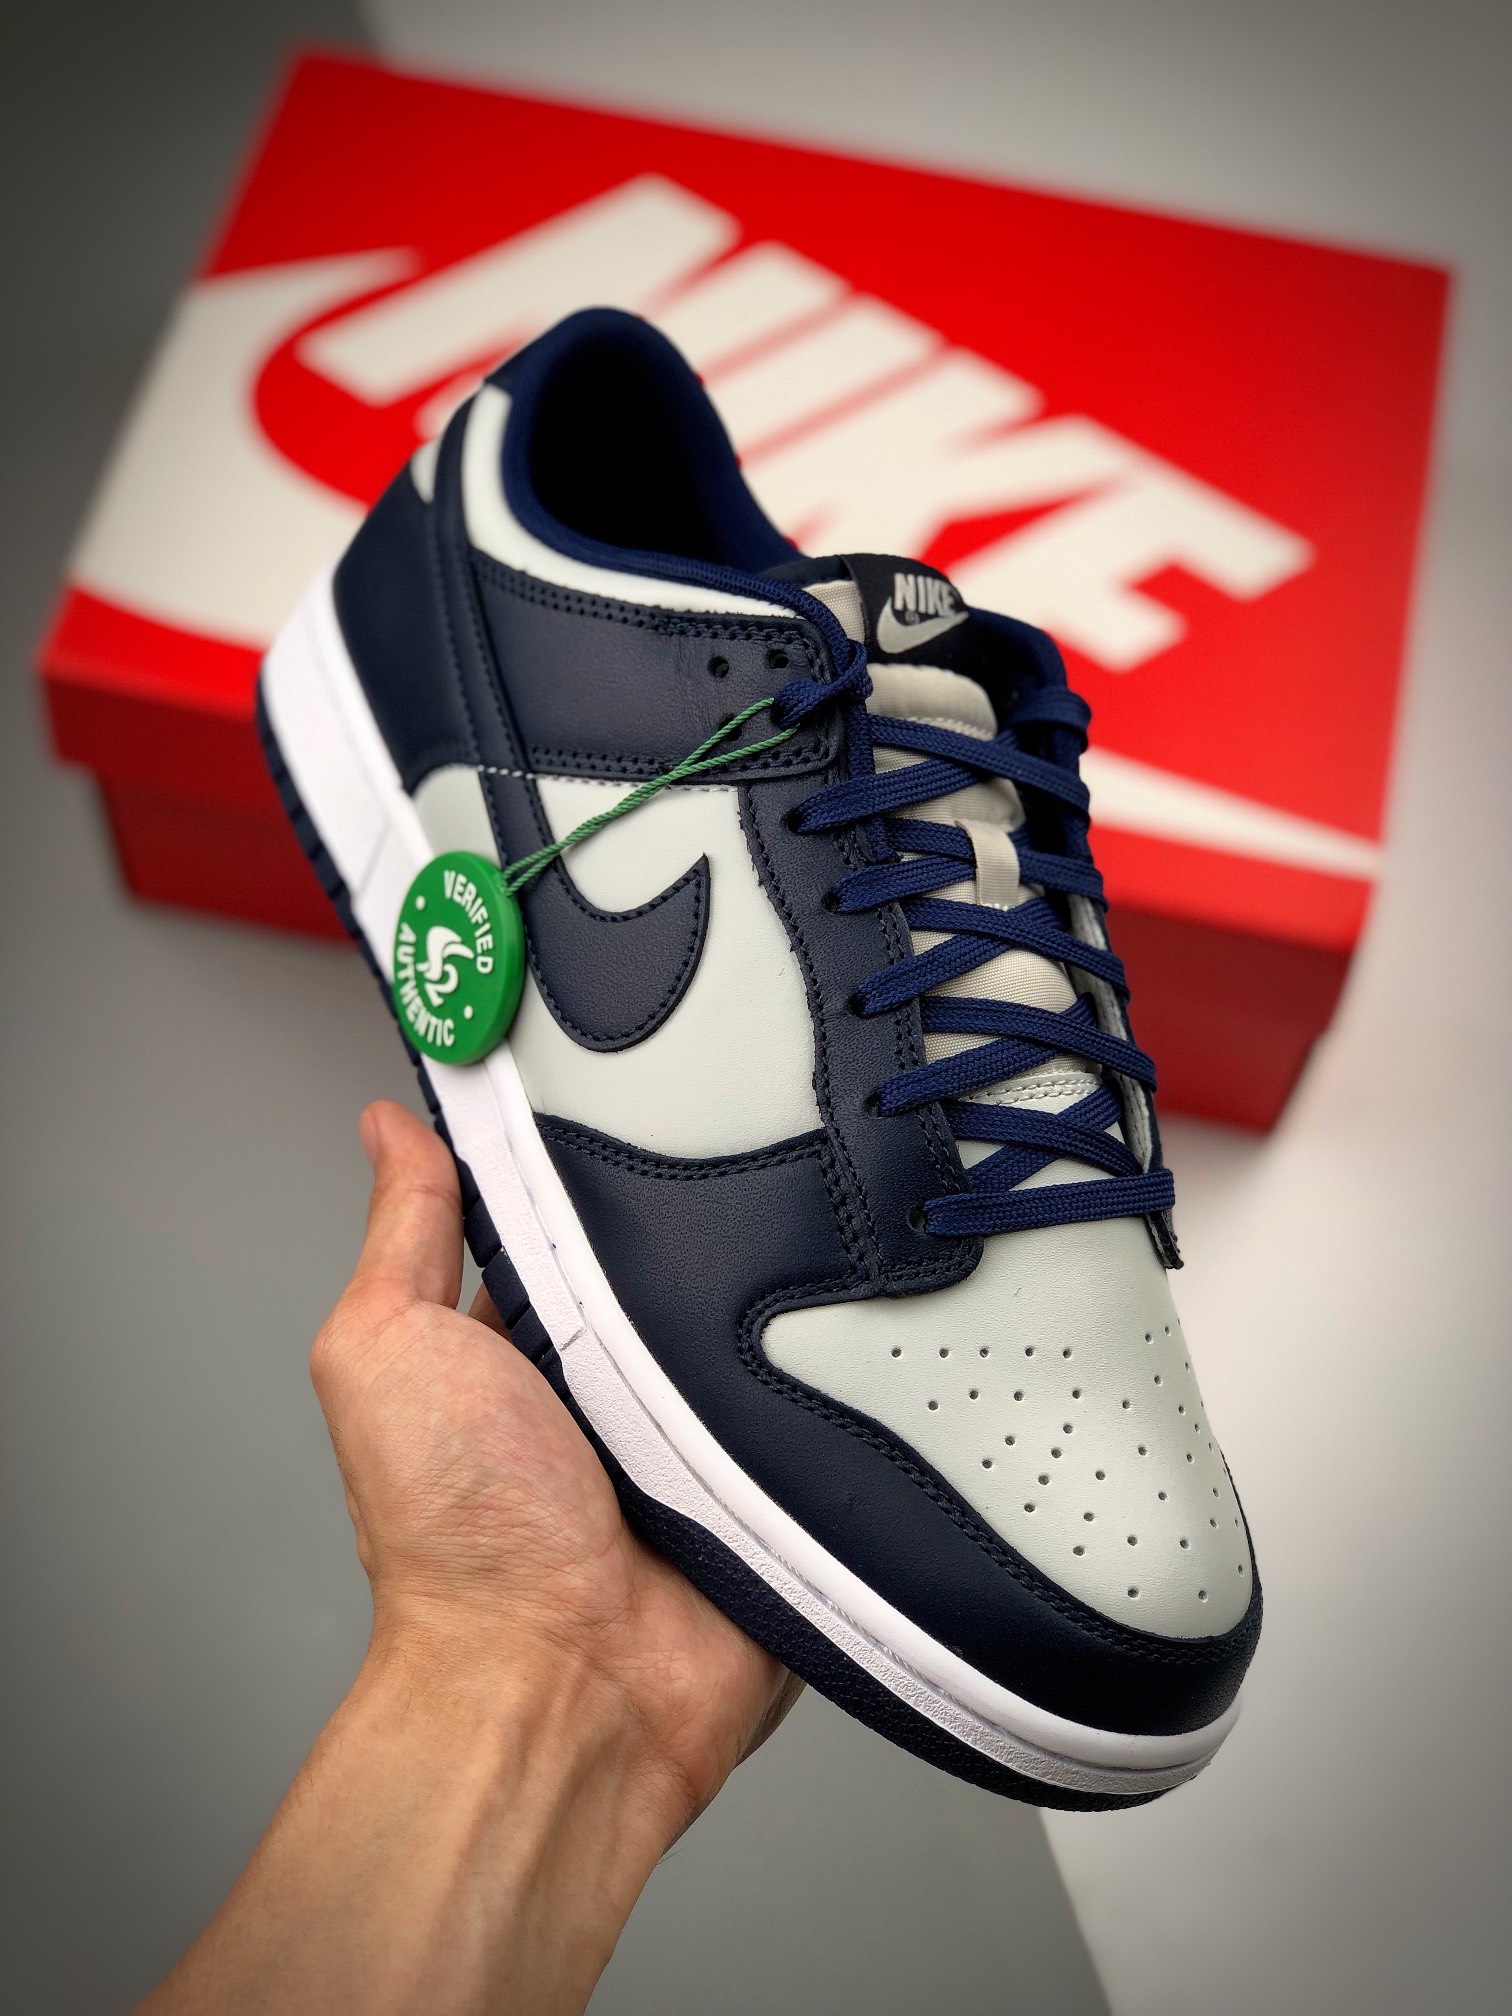 Nike Dunk Low "Georgetown" DD1391-003 Shoes